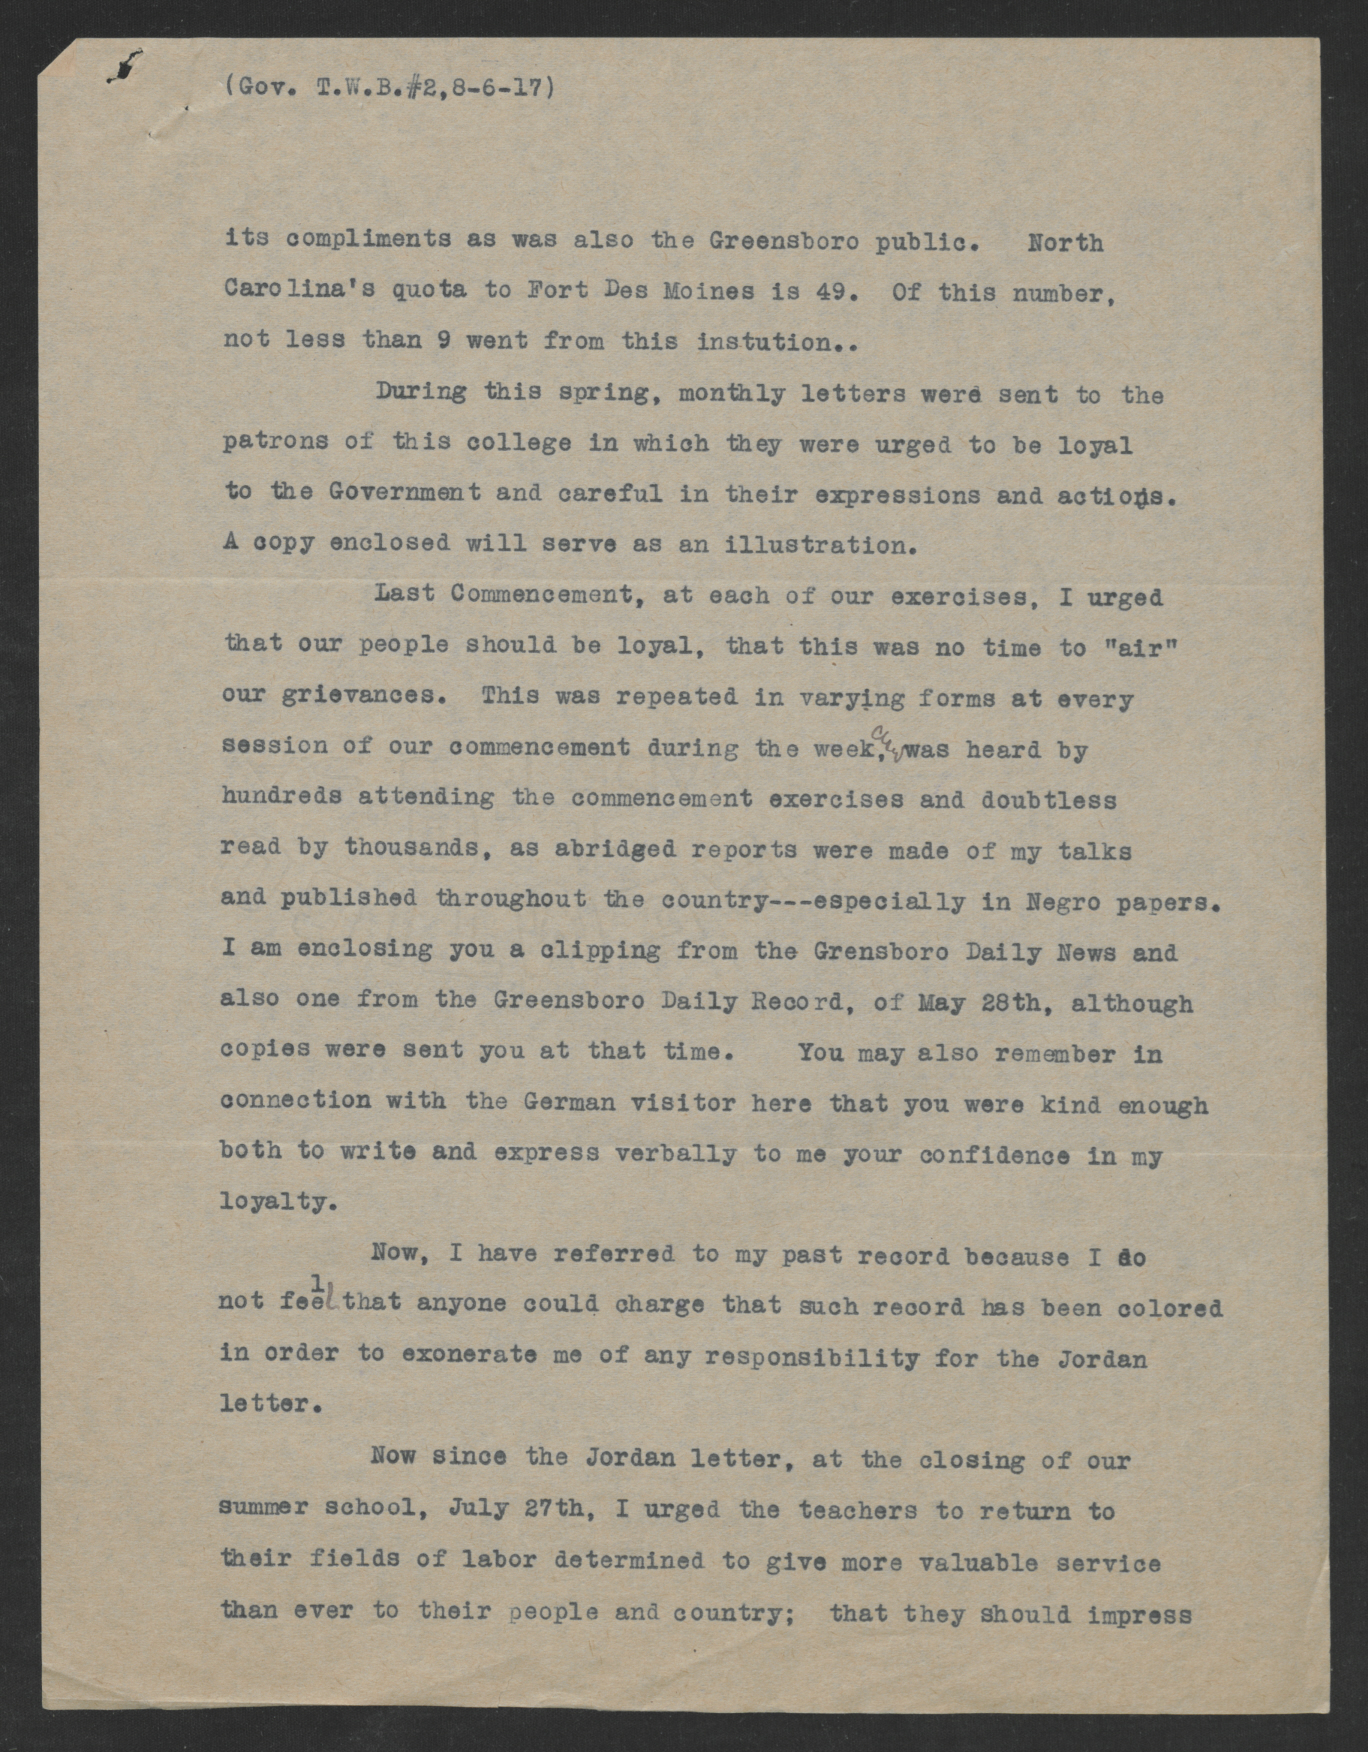 Letter from James B. Dudley to Gov. Bickett, August 6, 1917 - Page 2